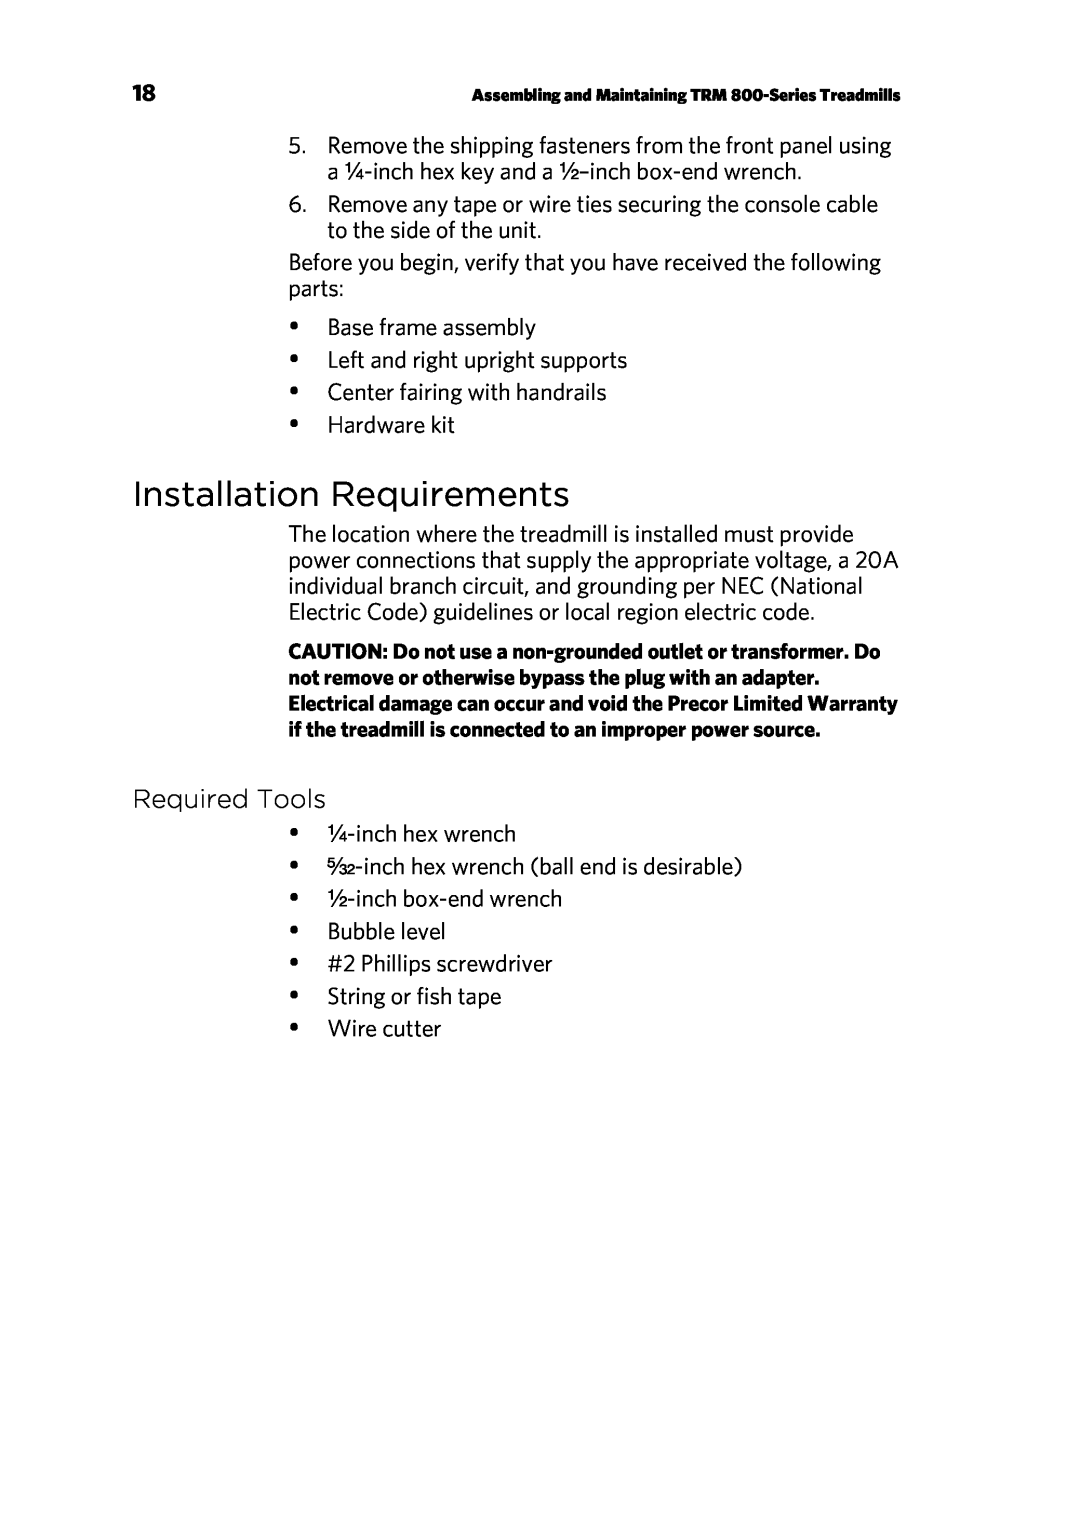 Precor P80 manual Installation Requirements, Required Tools 